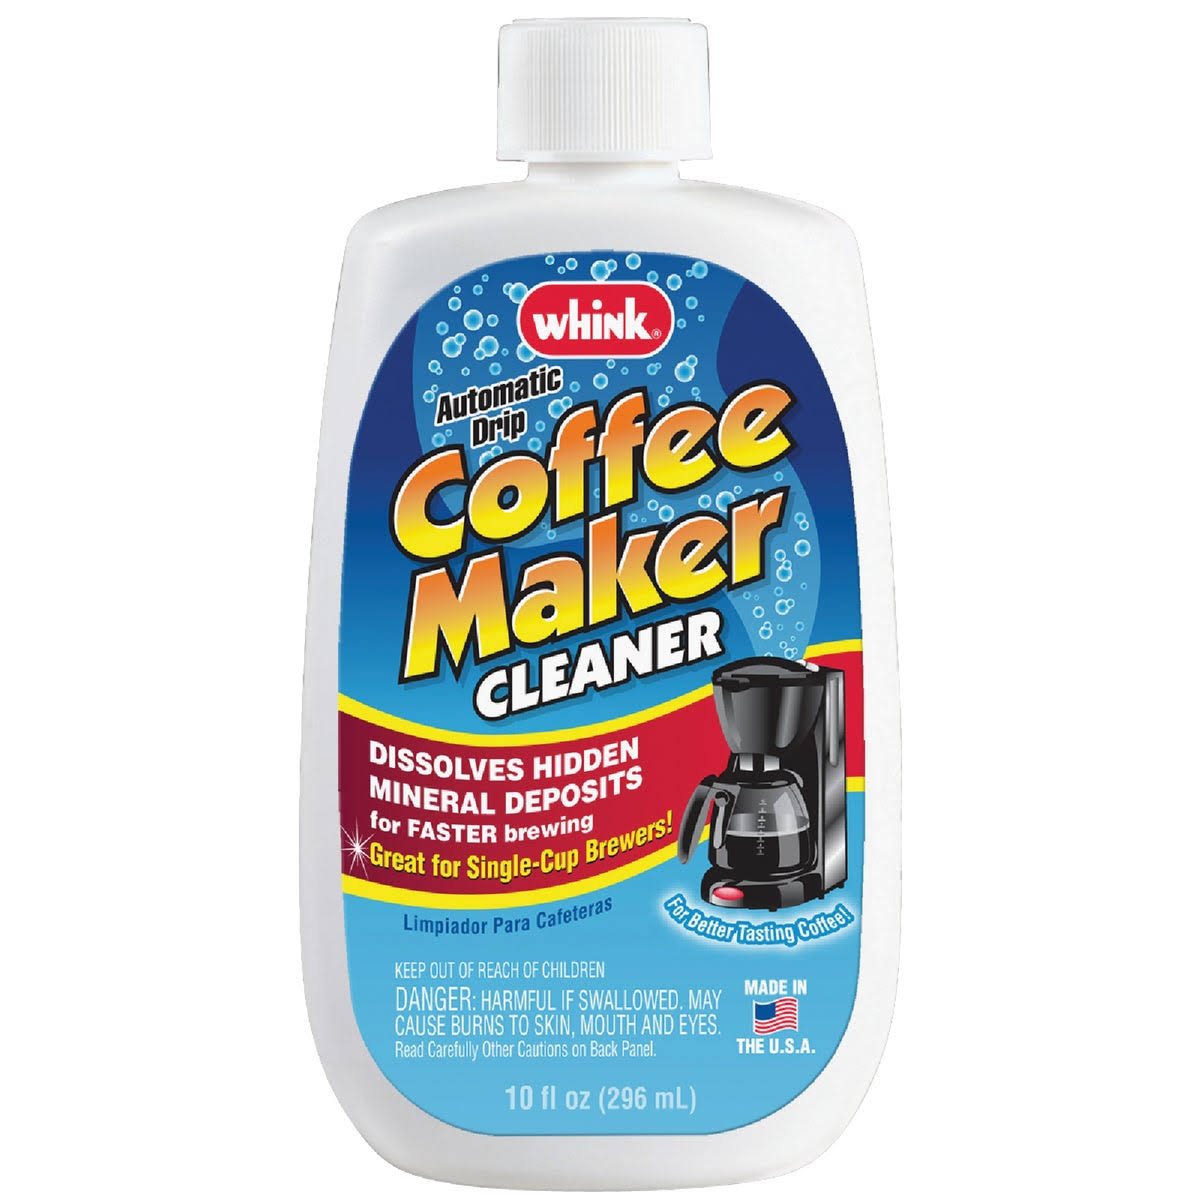 Whink Coffee Maker Cleaner - 296ml